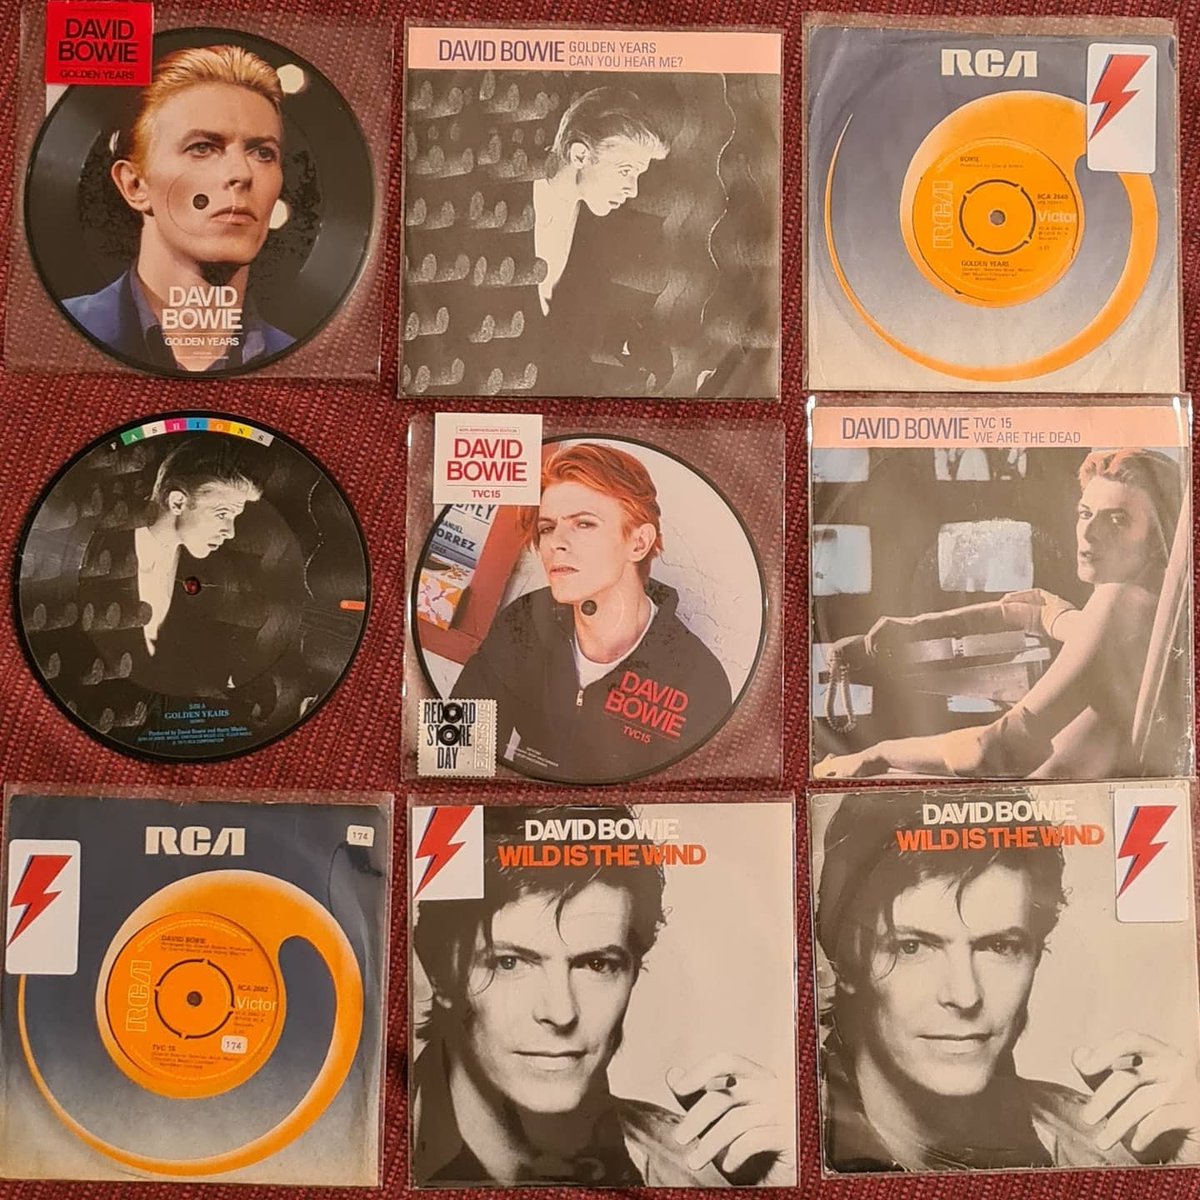 The mighty STATIONTOSTATION album was released in 1976, 46 years ago today. And guess what? Yep, it's on repeat in Micks house today.
#BowieForever #ThinWhiteDuke